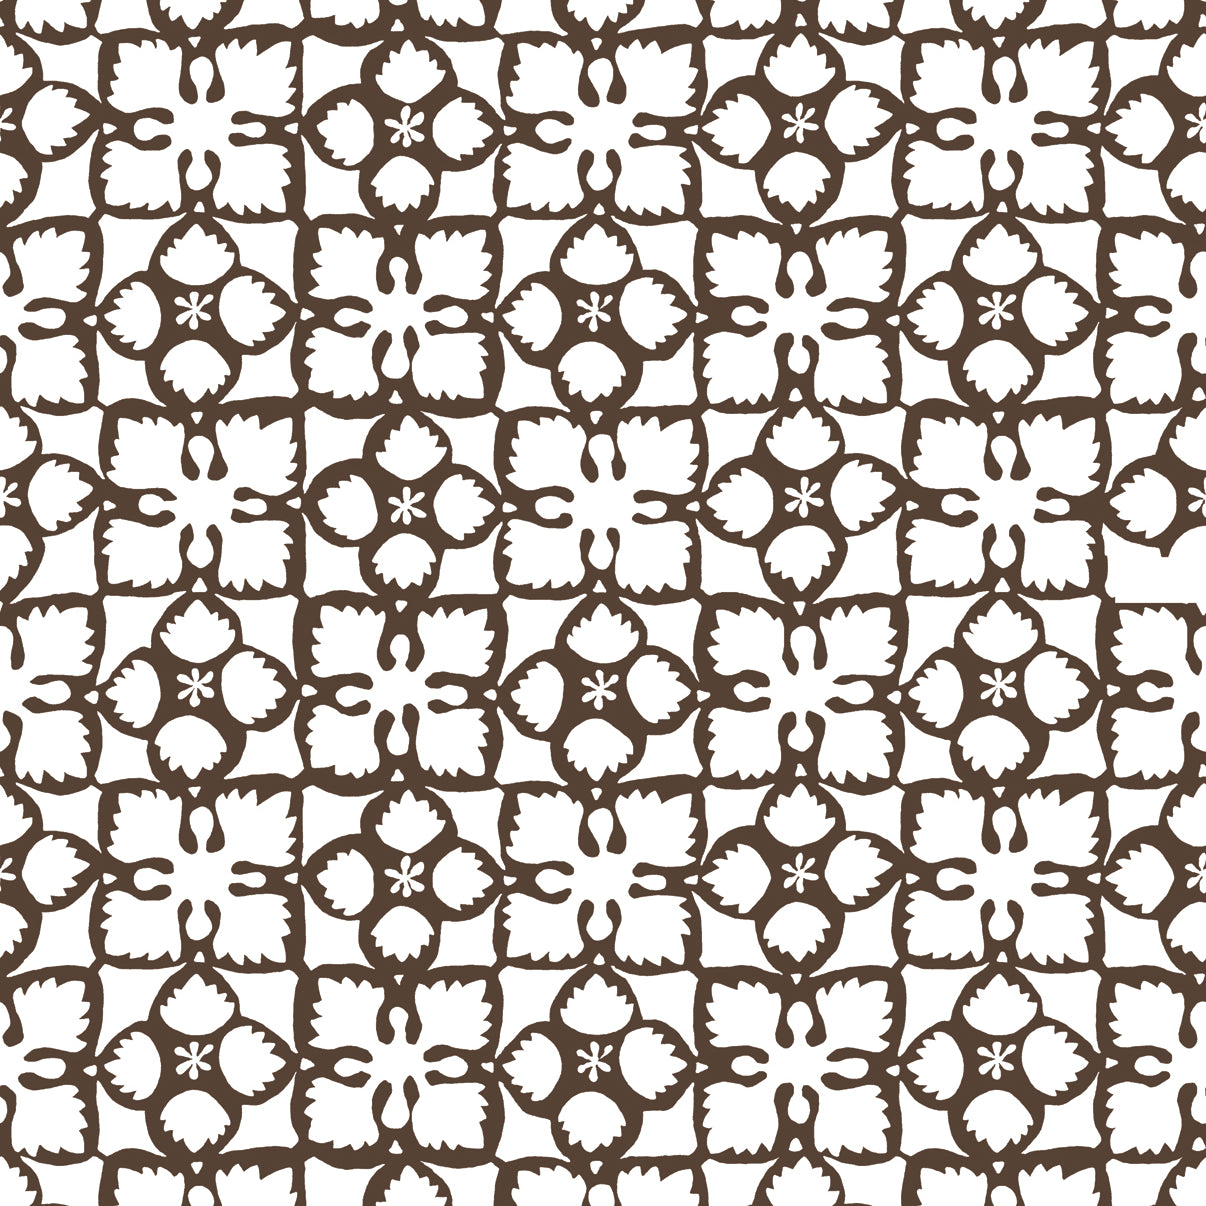 Detail of wallpaper in a botanical lattice print in brown on a white field.